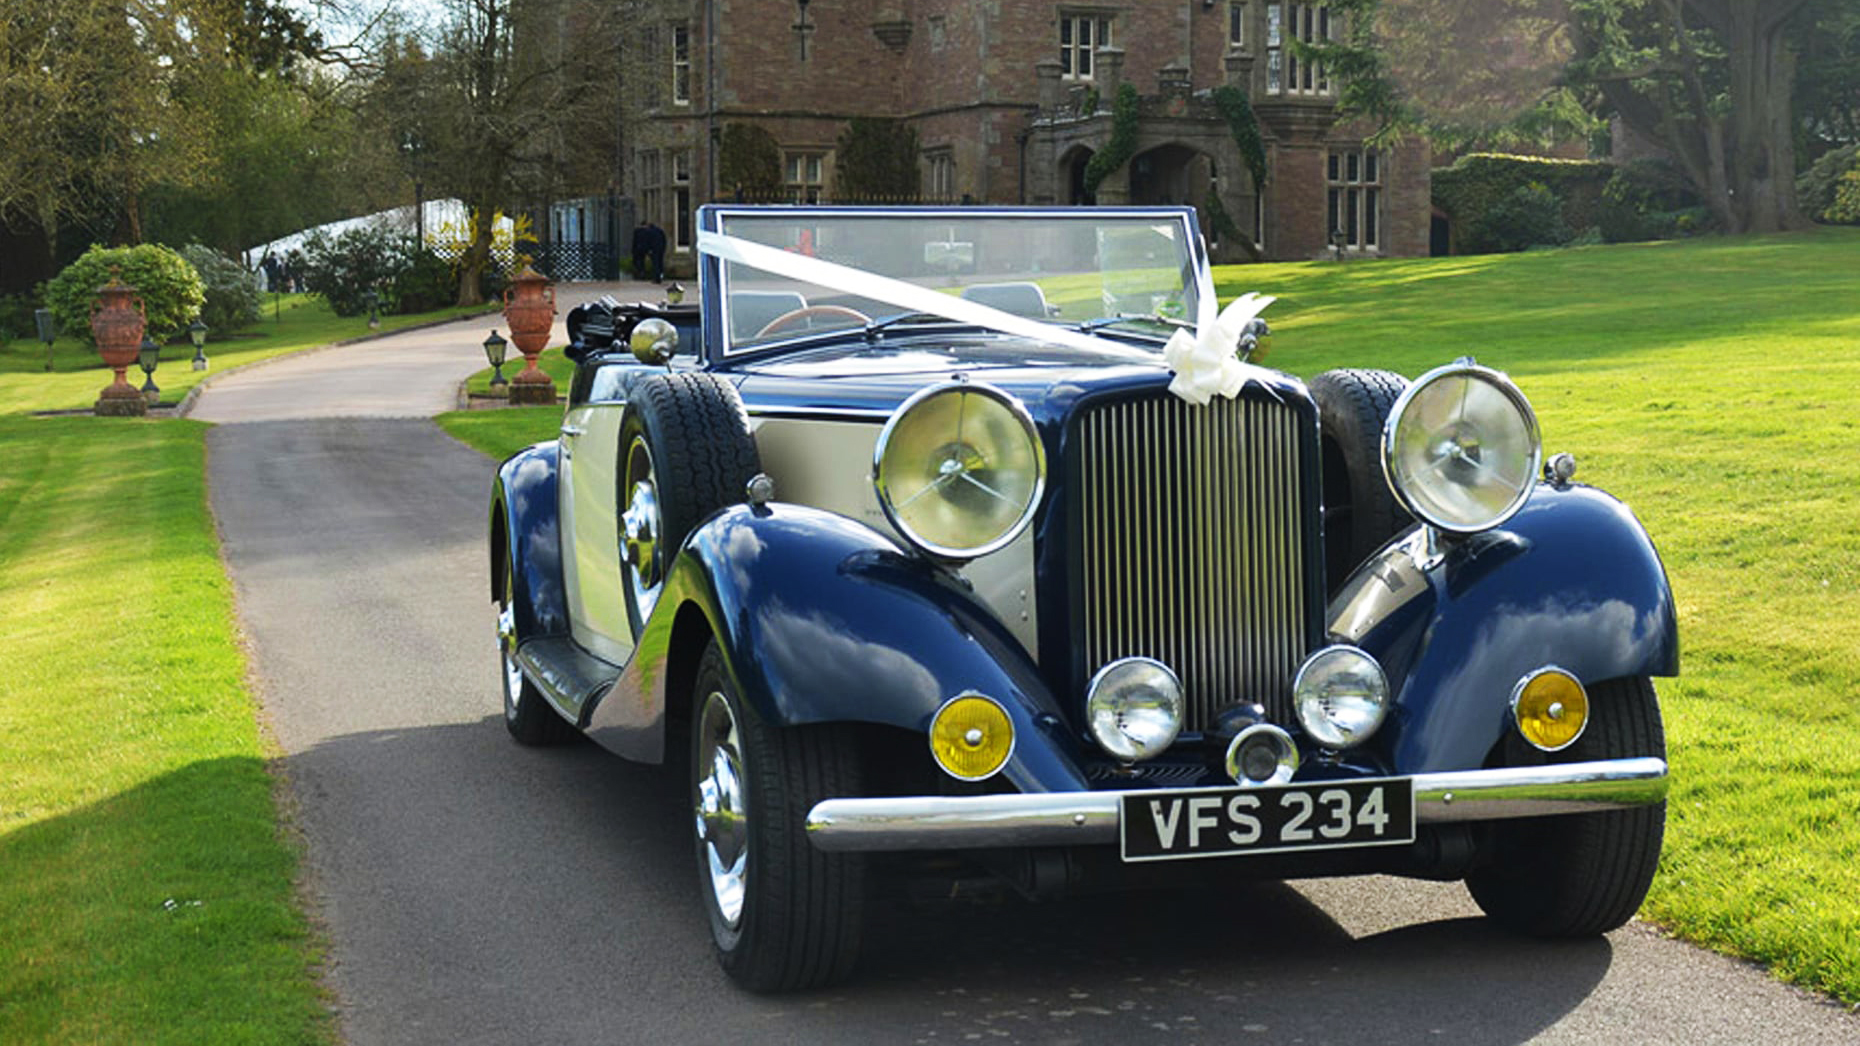 Blue and Ivory vintage Jaguar Drophead on the driveway of a local wedding venue inBirstall.